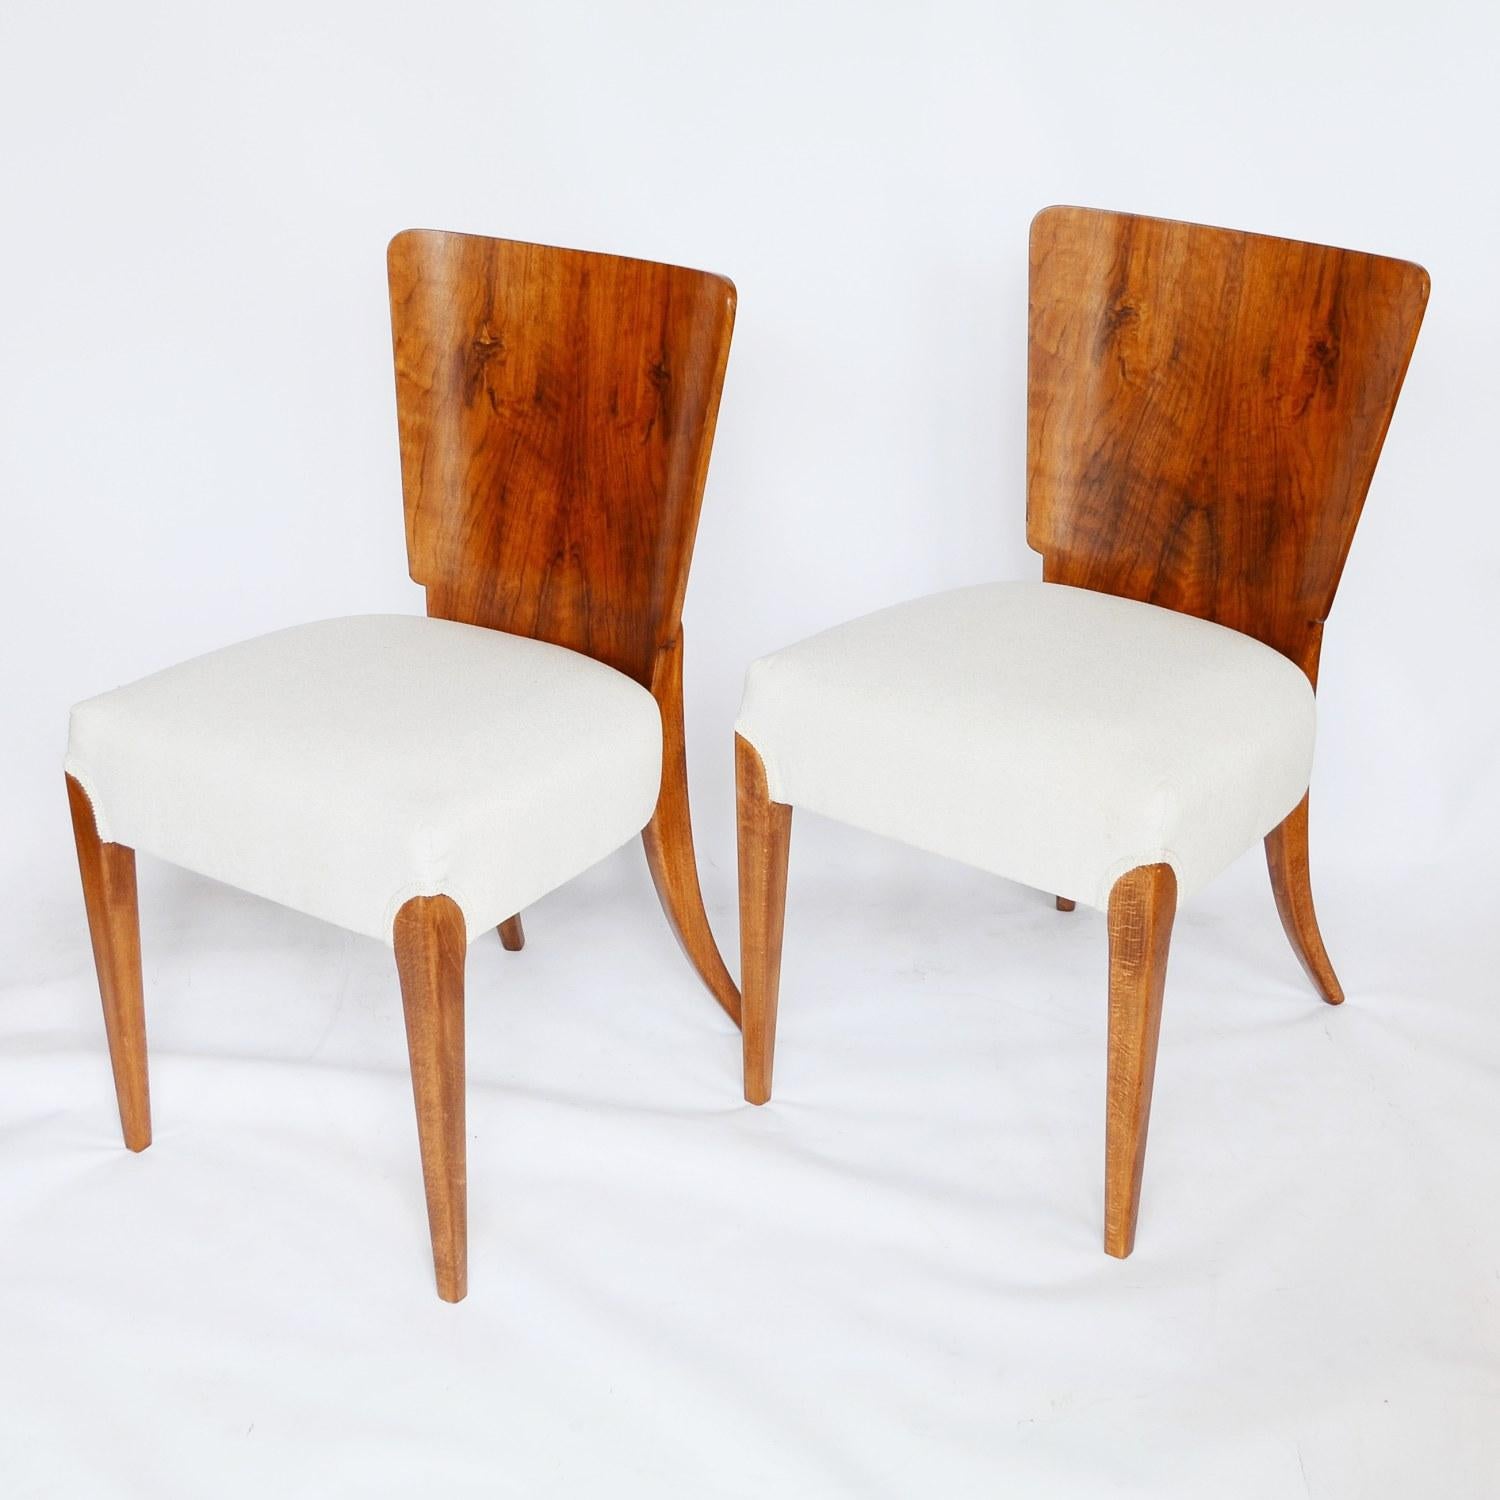 set of four dining chairs by Jindrich Halabala. Walnut veneered with solid walnut tapered legs. Re-upholstered in cream linen. 

Origin: Czech Republic 

Date: circa 1950

Item Number: 1410202

All of our furniture is extensively polished